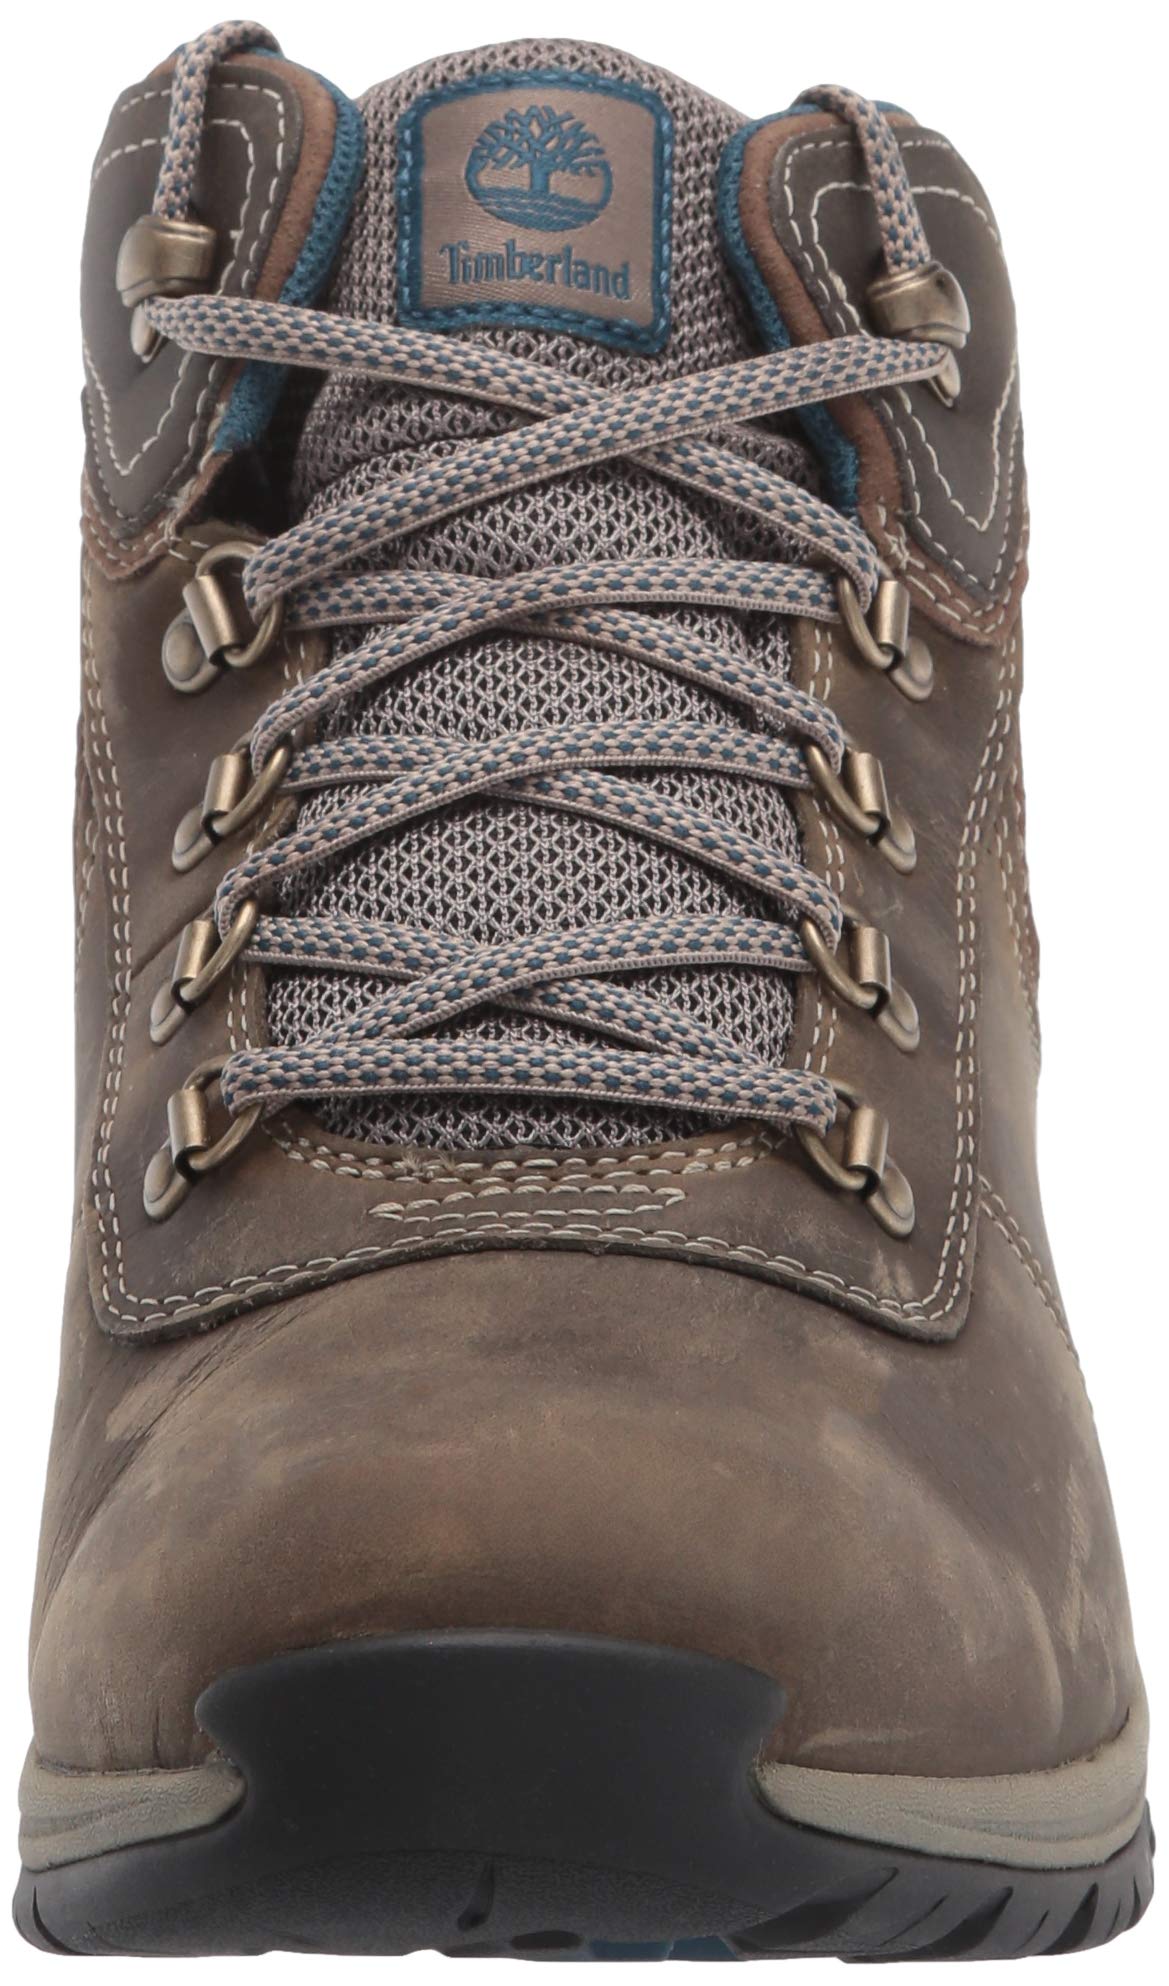 Timberland Women’s Mt Maddsen Mid Leather Waterproof Hiking Boot